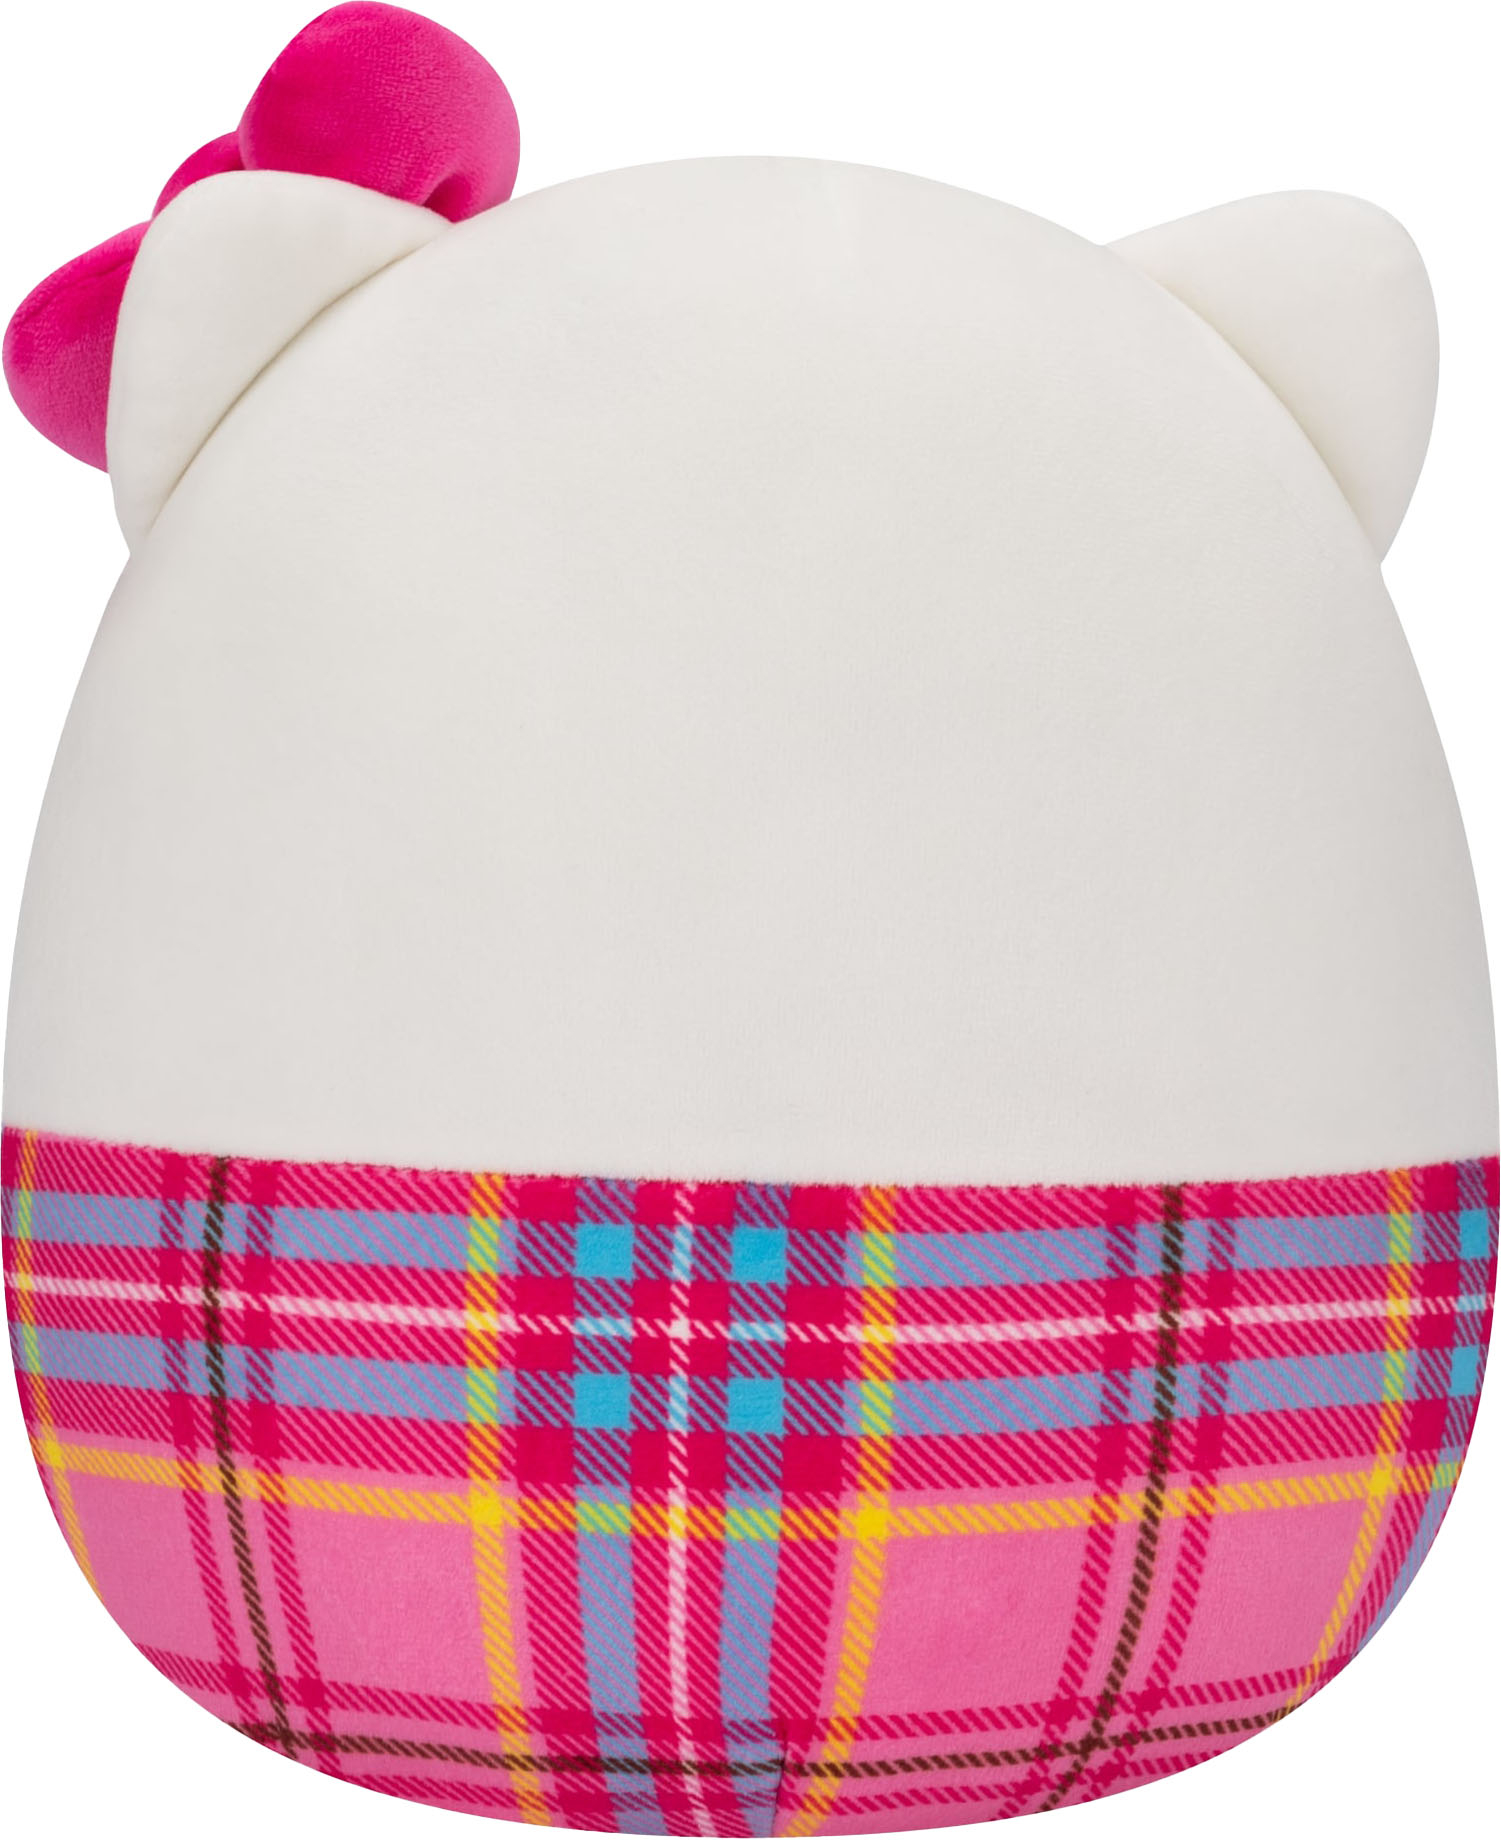 Jazwares Squishmallows 8 Plush Assortment Pet Shop Styles May Vary  SQ21-8AST-I - Best Buy